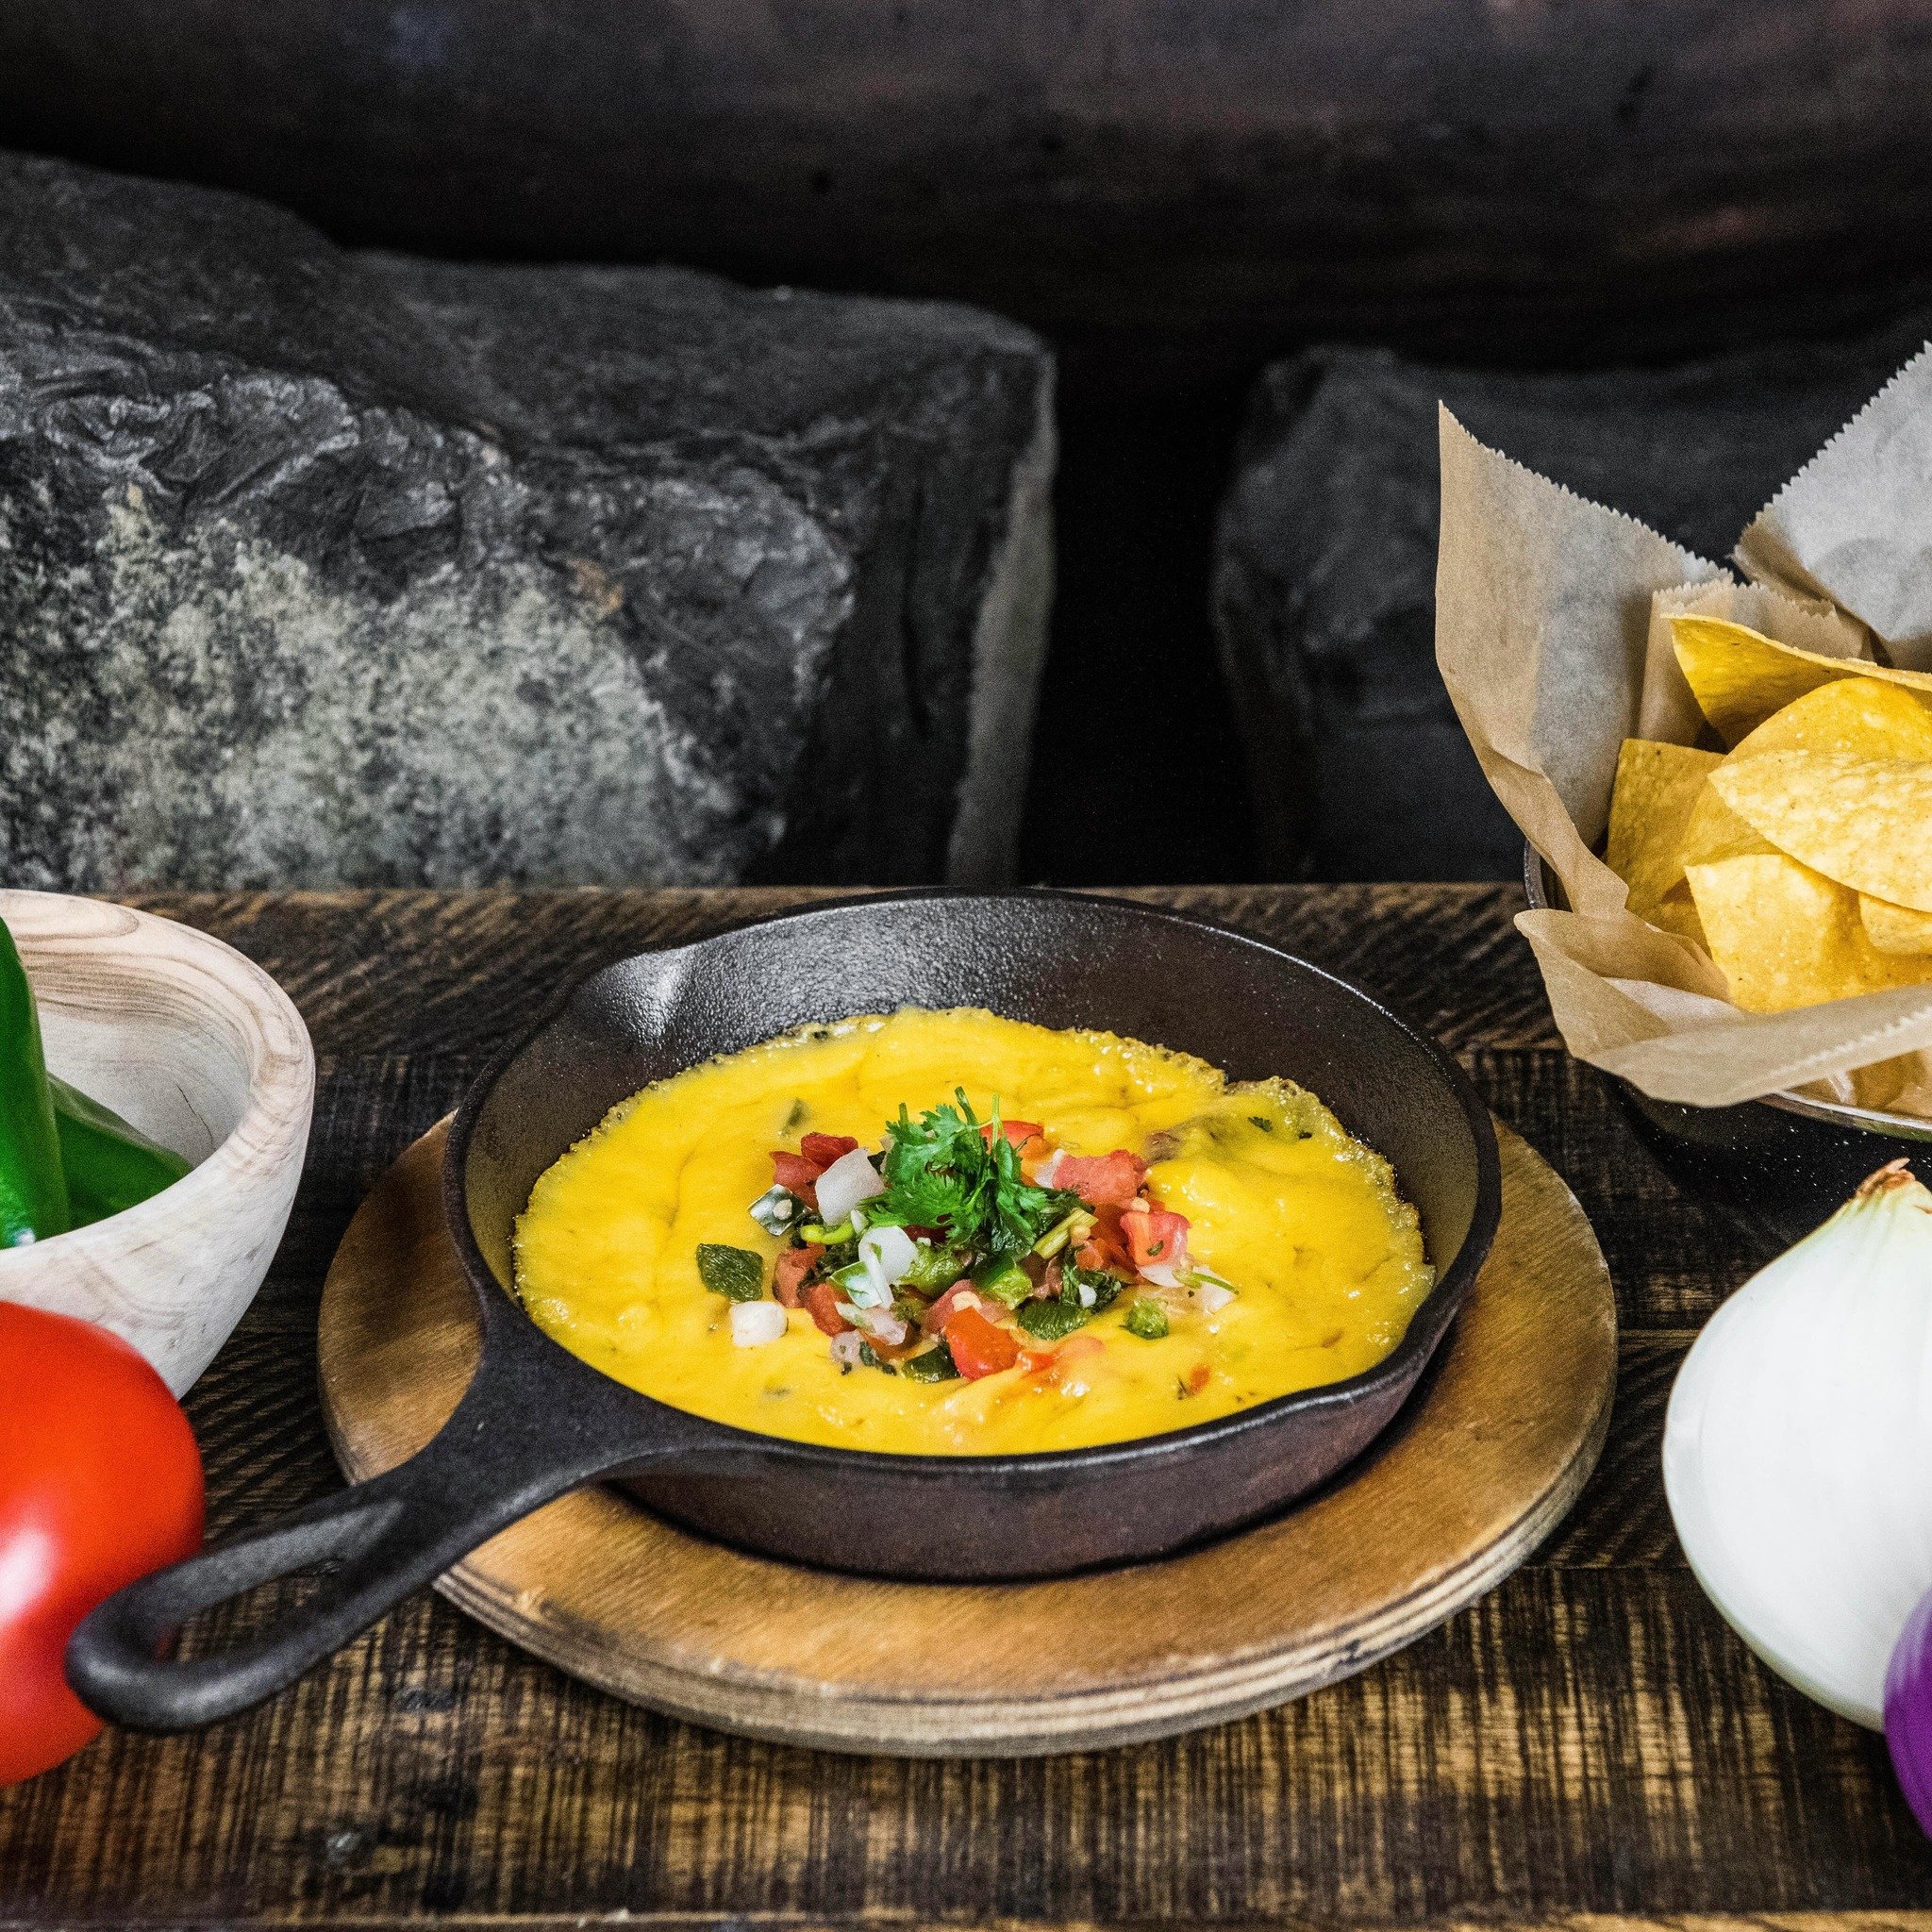 Dip into cheesy bliss with our Fiesta Queso dip. A dip so divine, it&rsquo;s impossible to resist. To find your nearest location, visit us online at https://www.Moctezumas.com/.